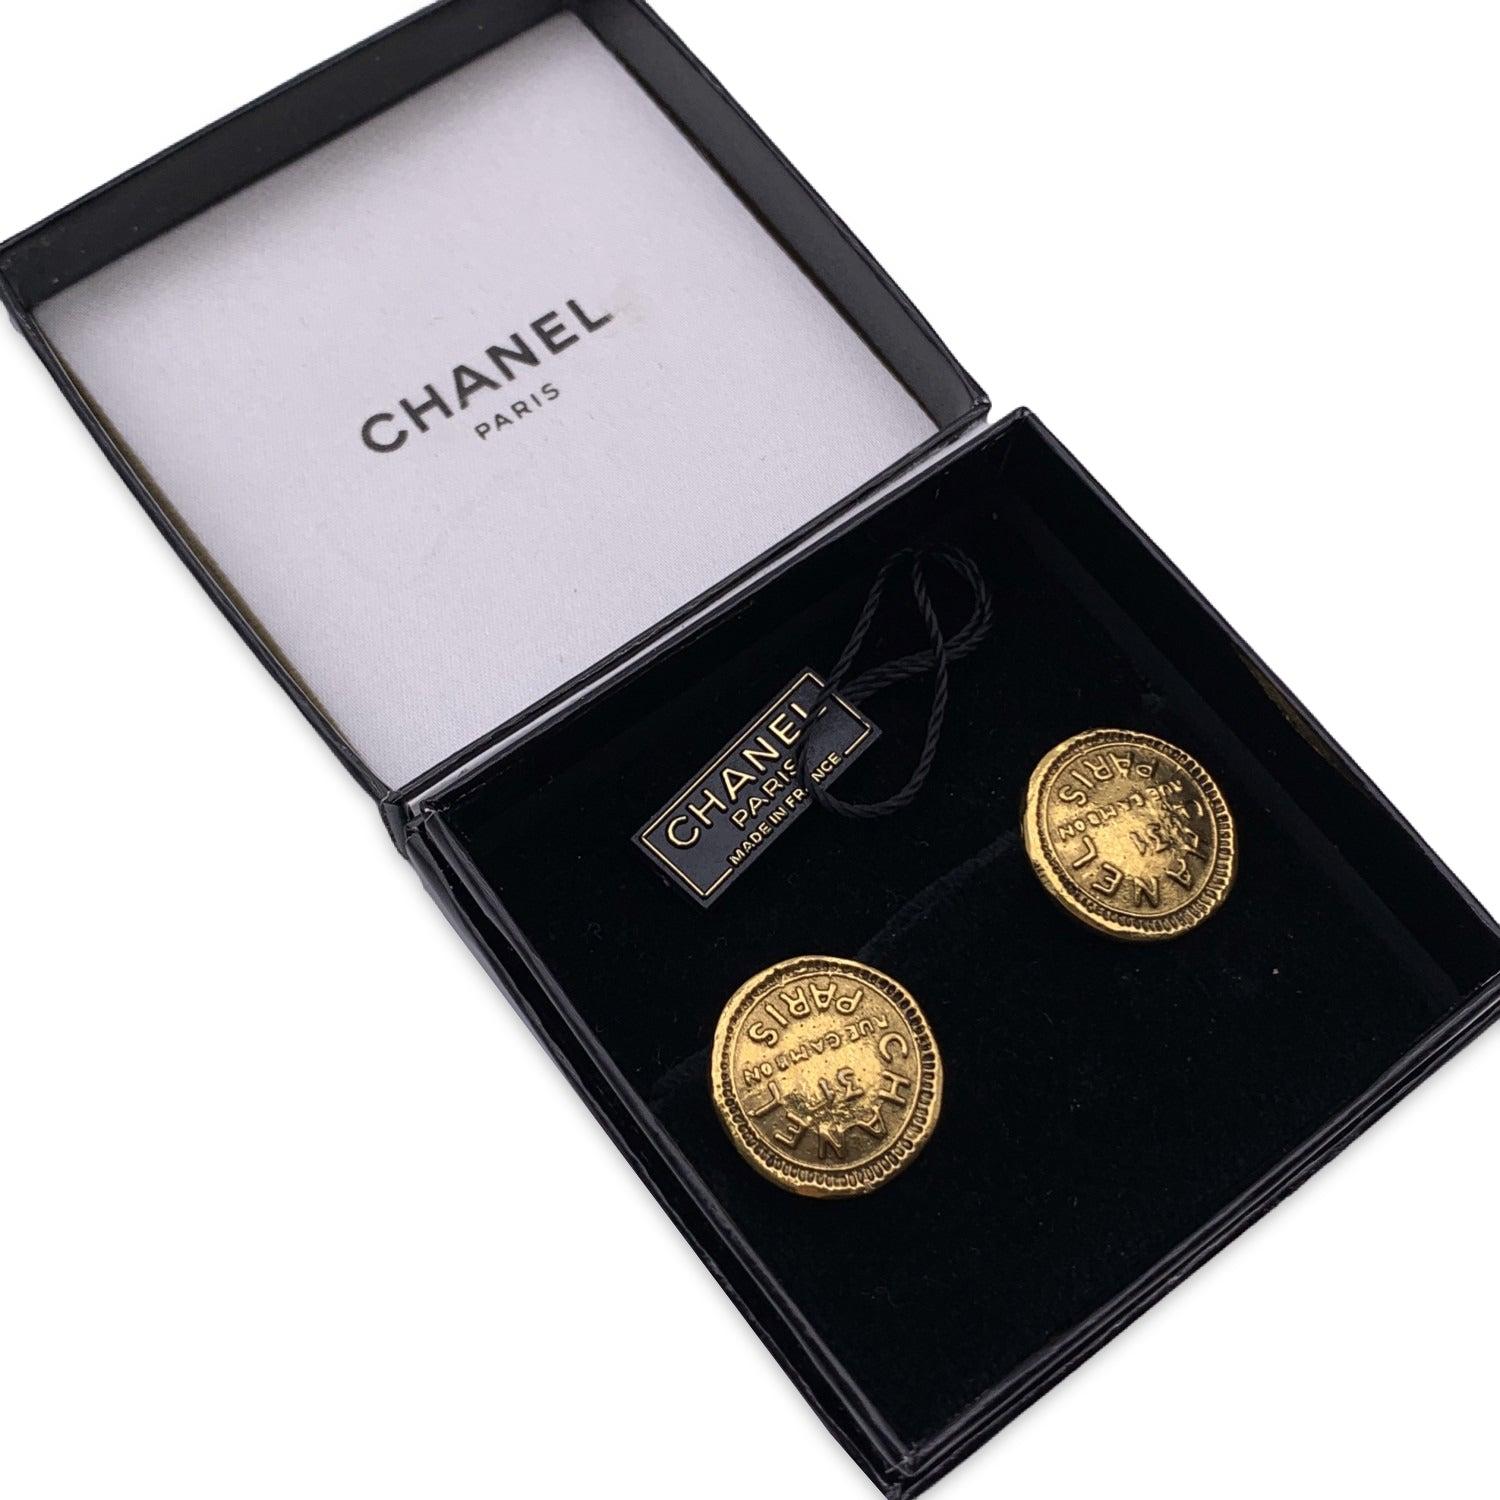 Beautiful vintage earrings by CHANEL, from the early 1980s. They are finely crafted in gold metal and feature 'Chanel 31 Rue Cambon Paris' embossed writing. Clip on closure on the back. 'CHANEL - CC - Made in France' oval tag on the reverse of the